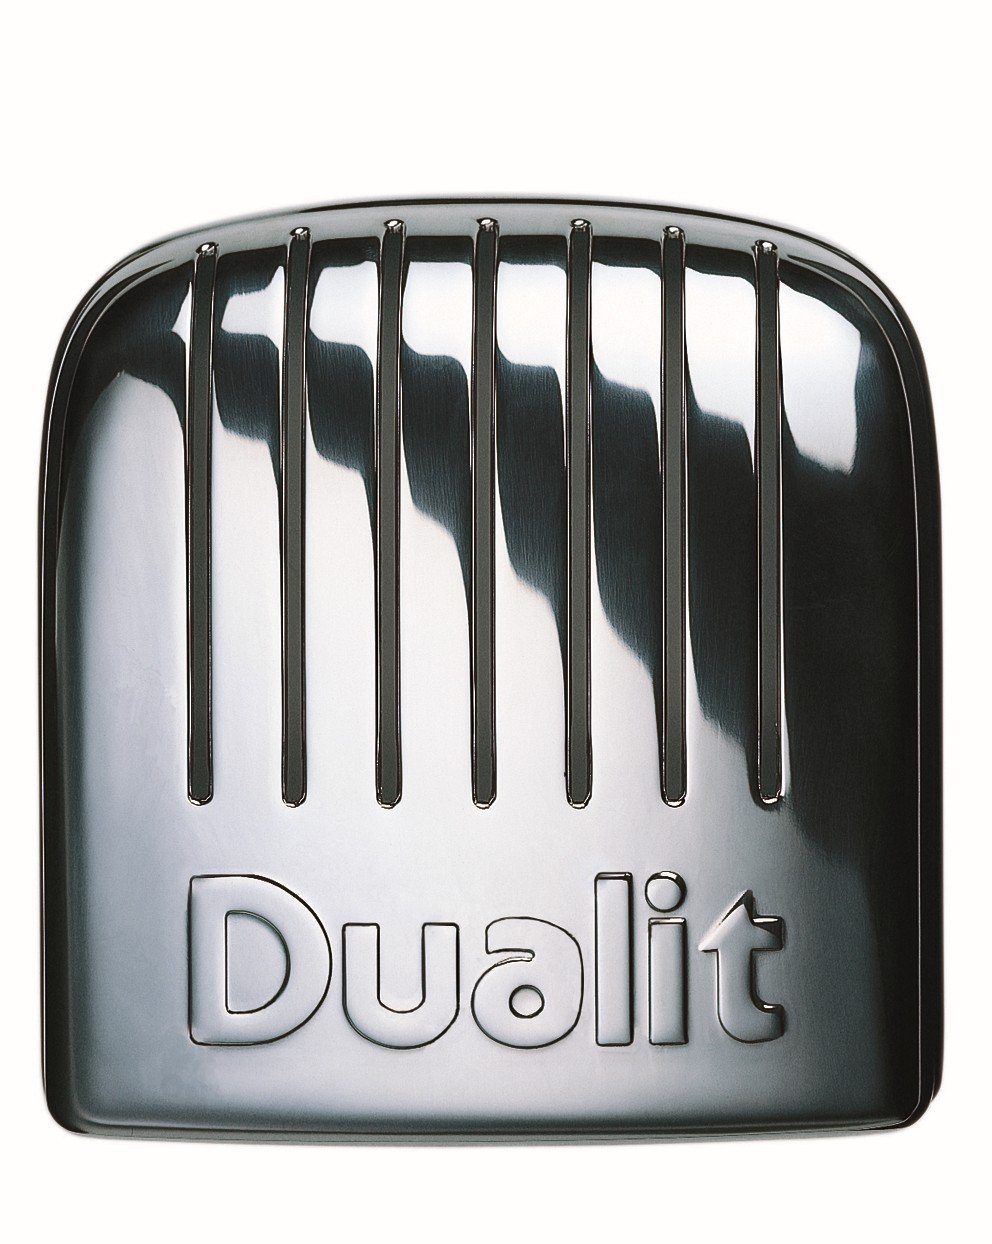 Dualit Toaster Dualit Classic 4er-Toaster (Poliertes Metall) Polished